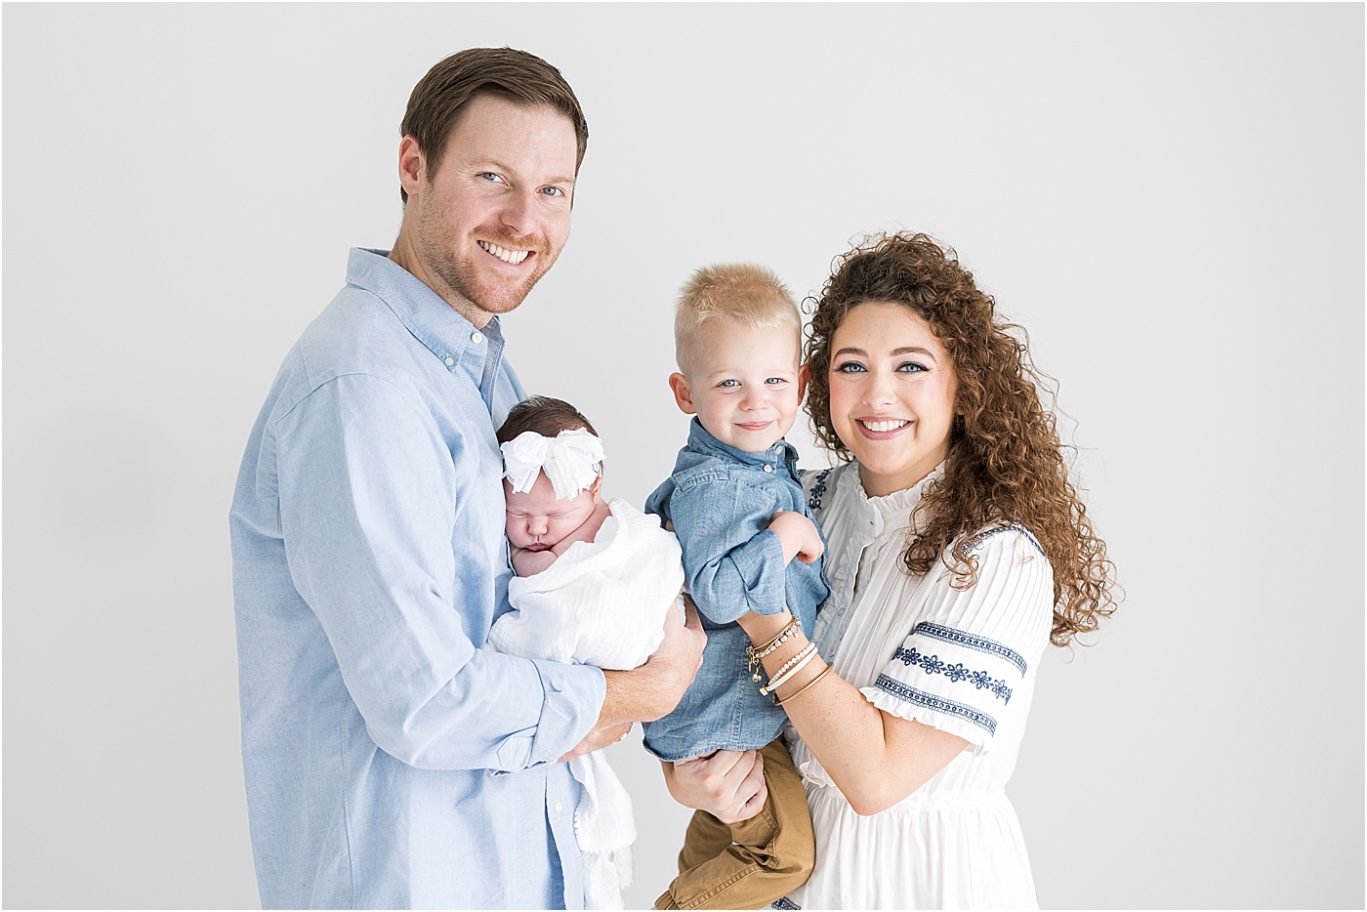 Family portraits in newborn photography studio in Fishes Indiana | Lindsay Konopa Photogrpahy